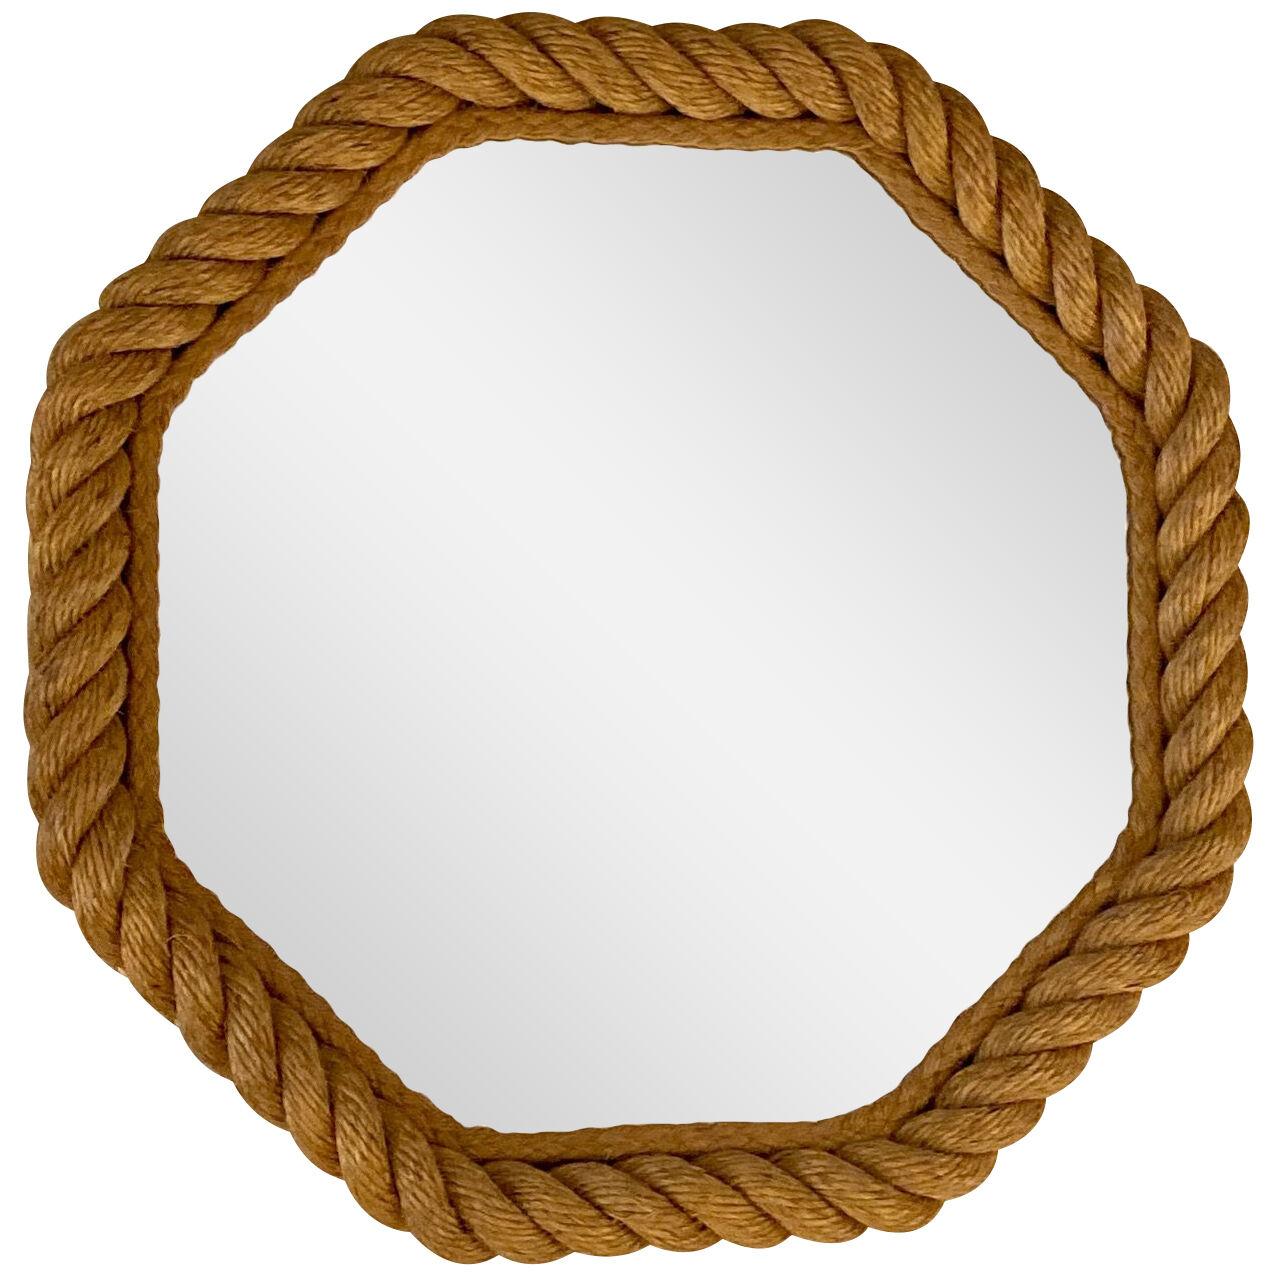 Octagonal Rope Mirror by Audoux Minet